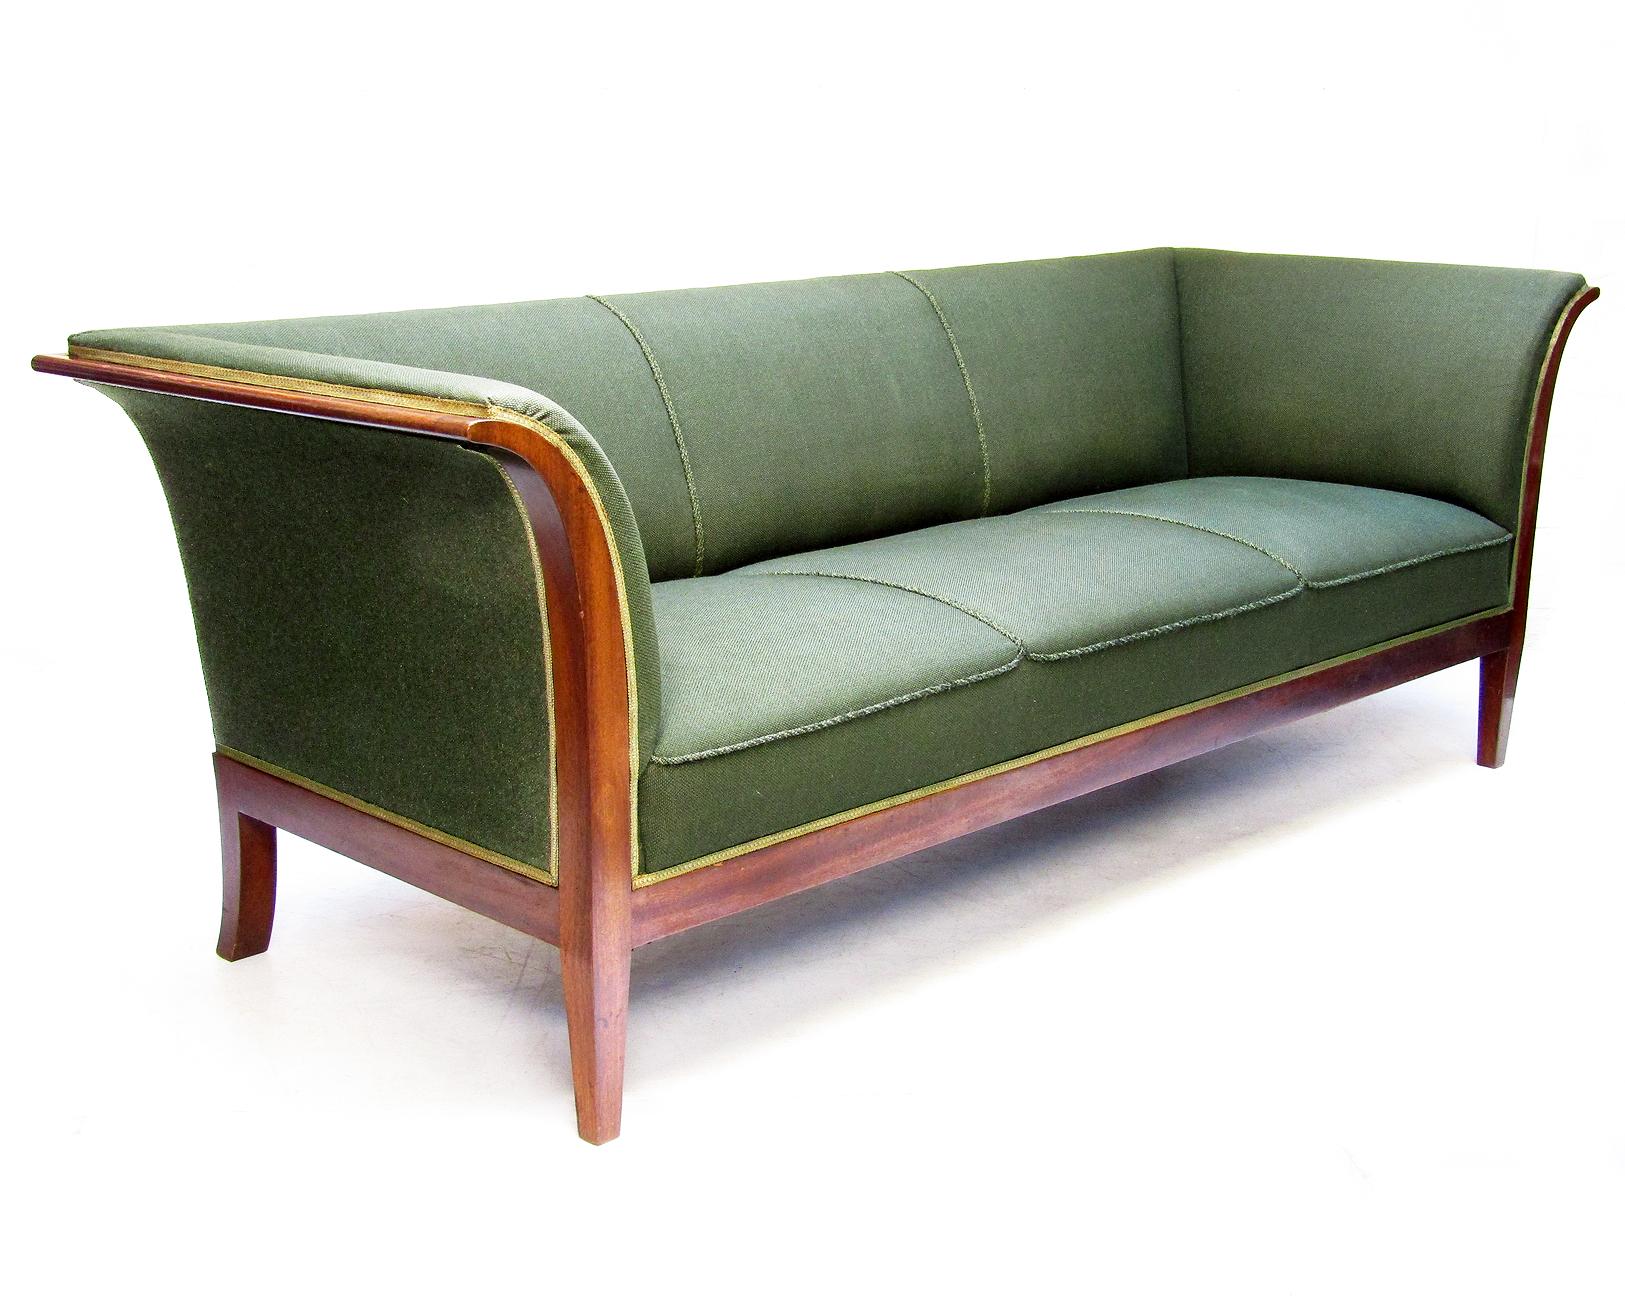 A striking Danish 3-seater sofa in Cuban mahogany by Frits Henningsen.

In competition with his teacher Kaare Klint, Henningsen was one of the outstanding designers of the early 20th century. A central aim was to modernise and refine earlier 19th